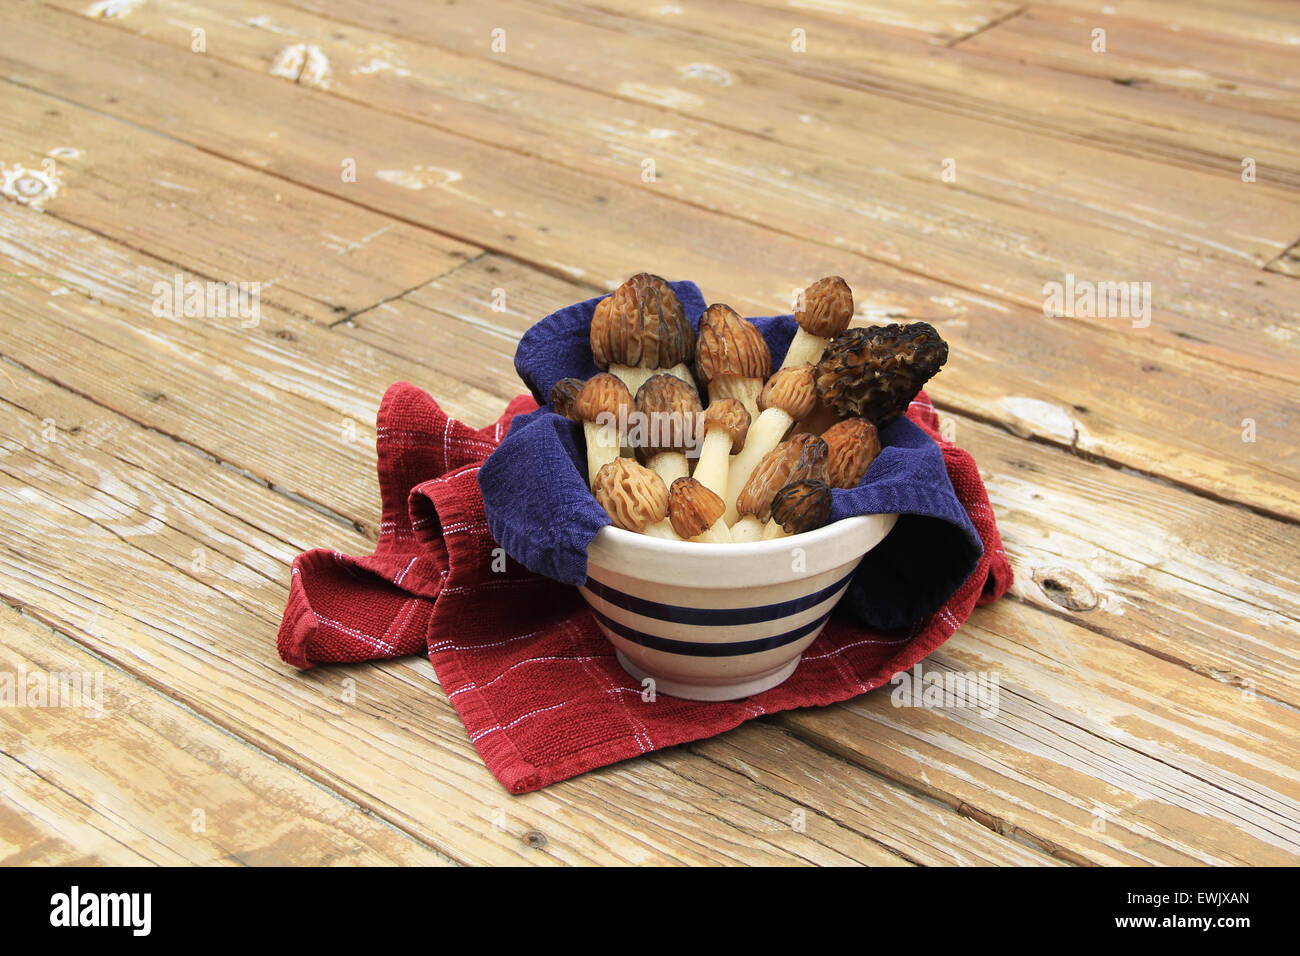 Wild Morel Mushrooms in a Crock with Towels Stock Photo